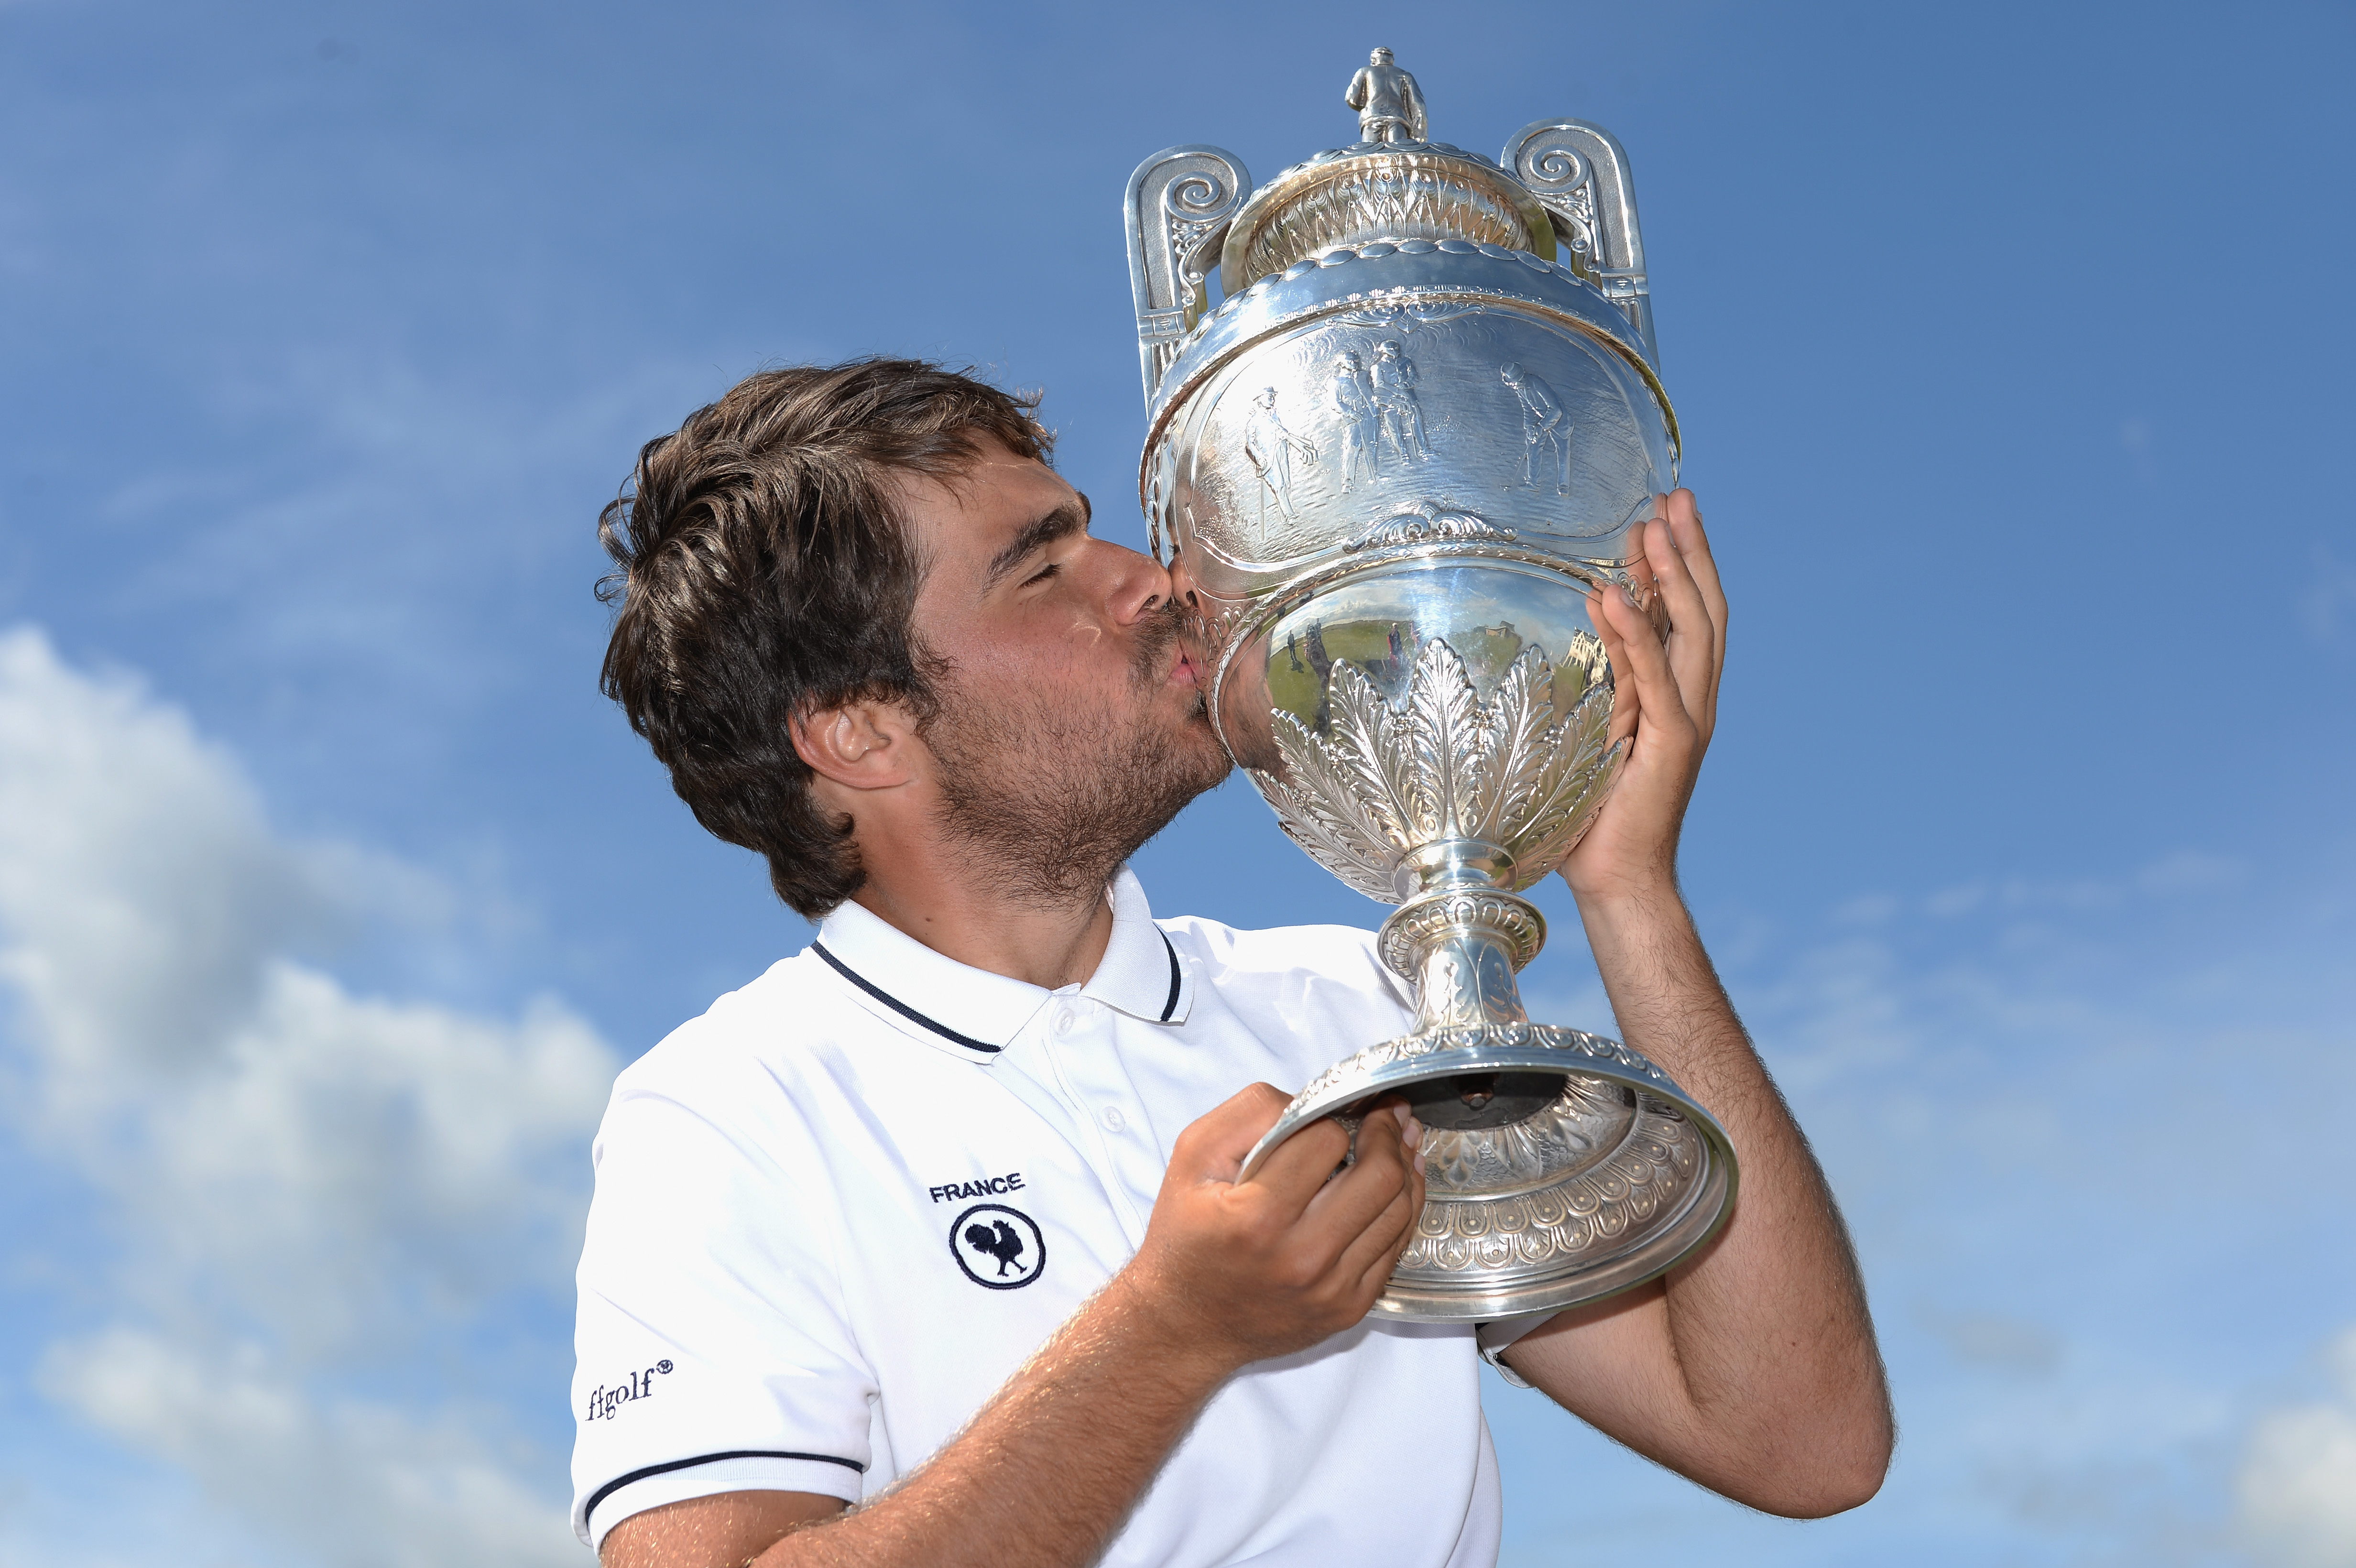 CARNOUSTIE, SCOTLAND - JUNE 20:  Romain Langasque of France poses with The Amateur Championship Trophy after winning the Final of The Amateur Championship 2015 - Day Six at Carnoustie Golf Club on June 20, 2015 in Carnoustie, Scotland.  (Photo by Tony Marshall/R&A/R&A via Getty Images)